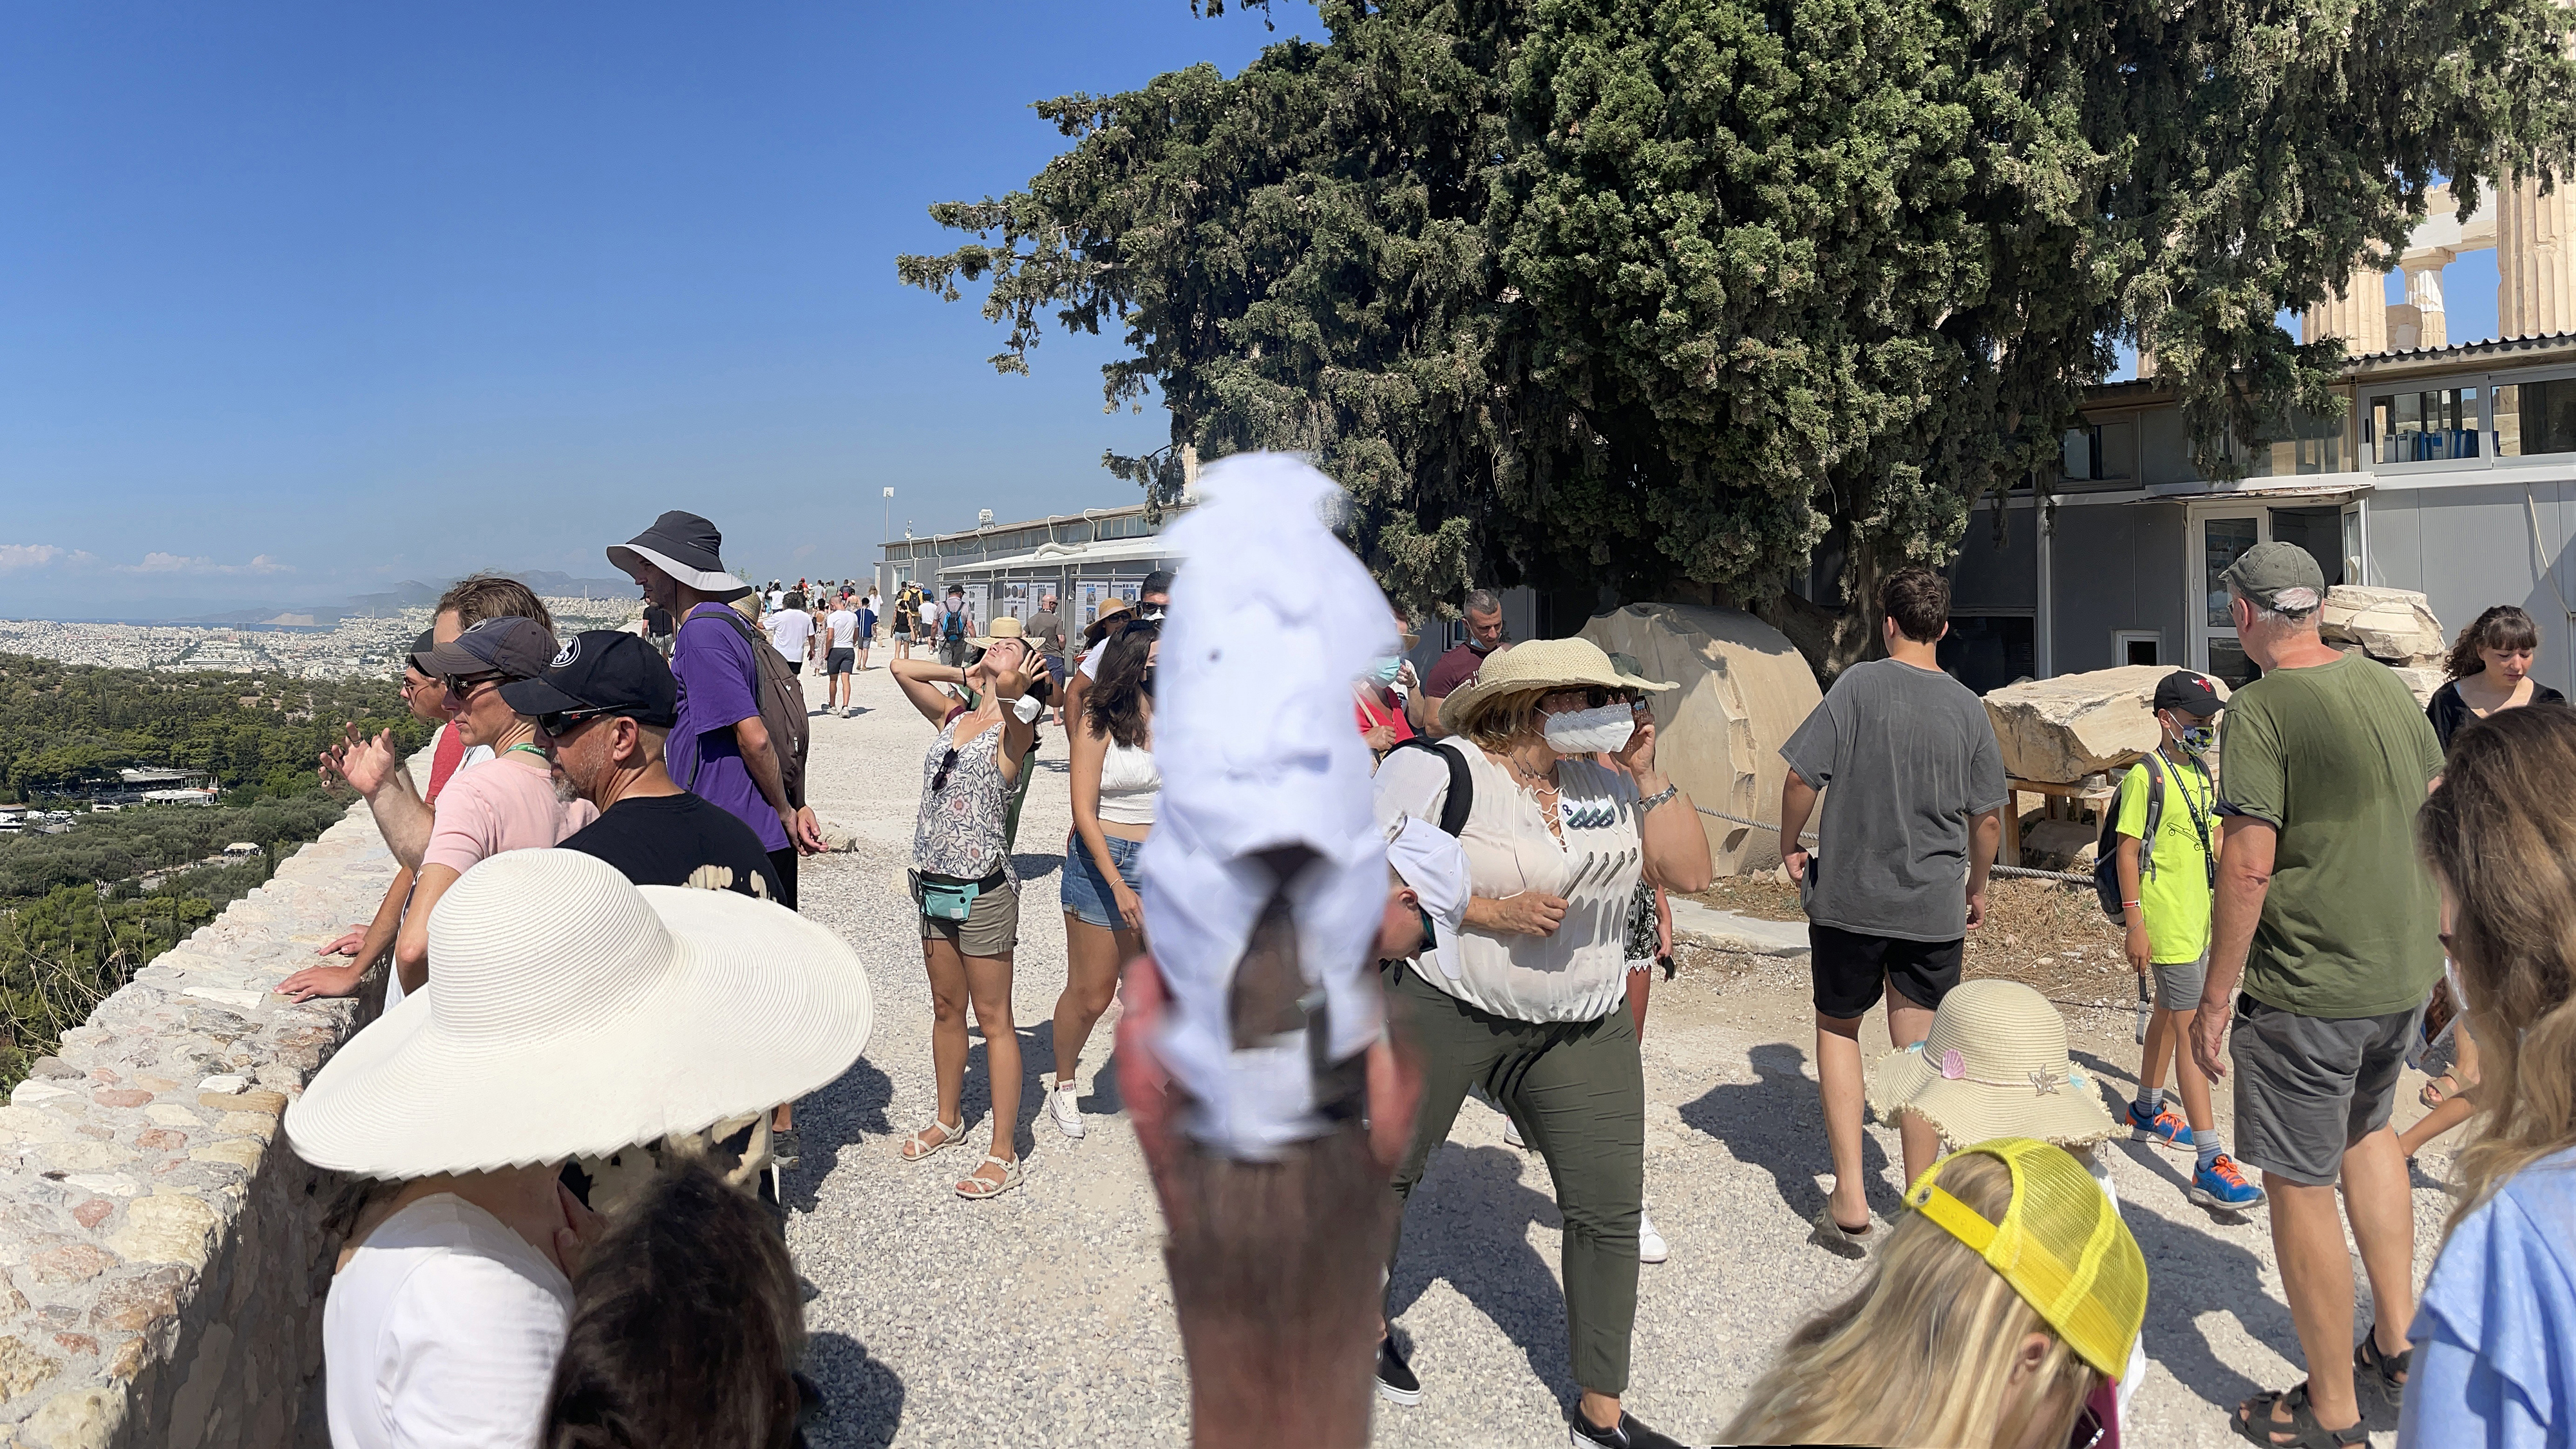 This is an image of tourists in Athens, Greece